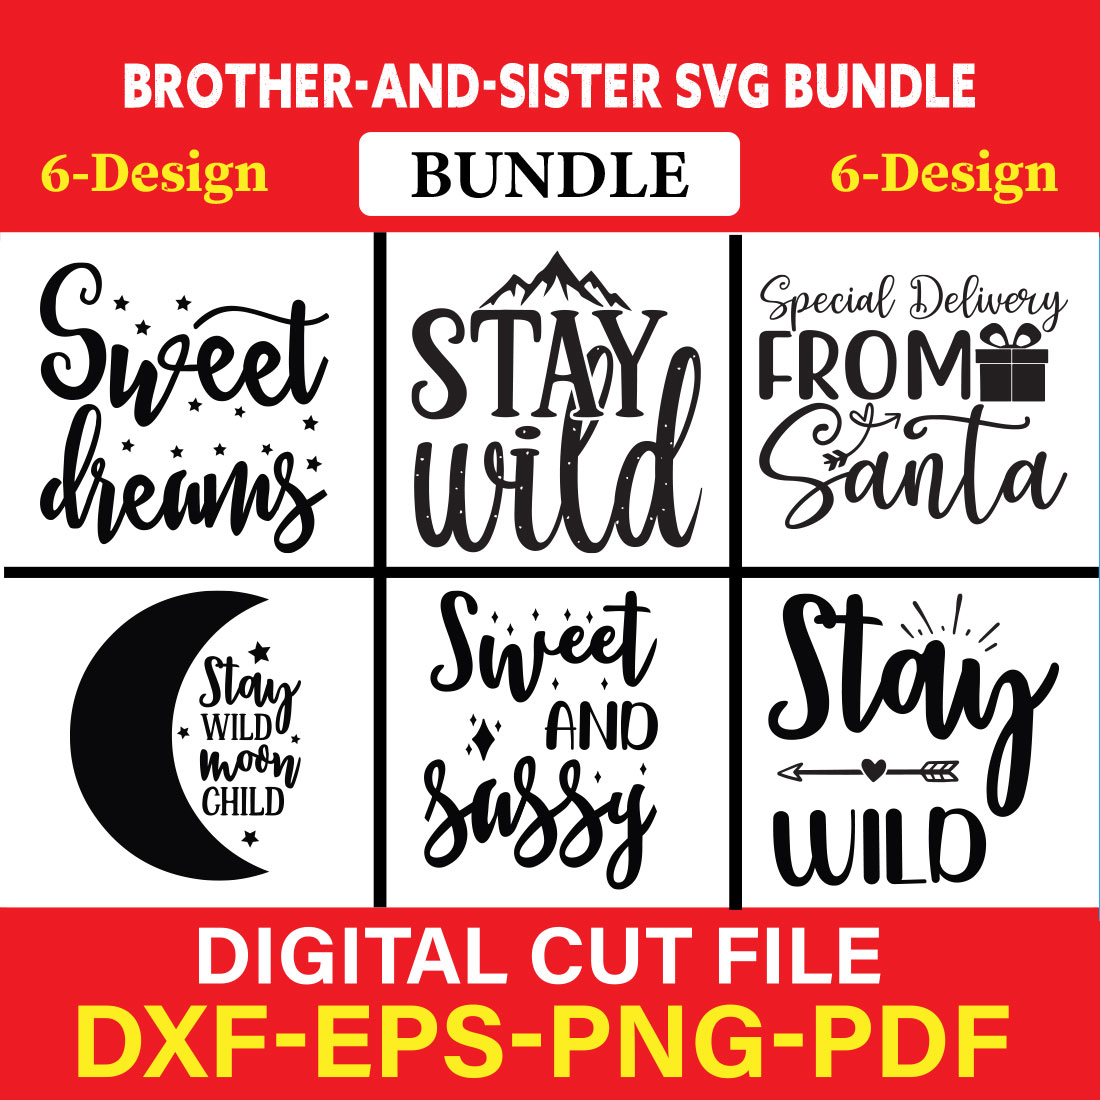 Brother-and-Sister T-shirt Design Bundle Vol-12 cover image.